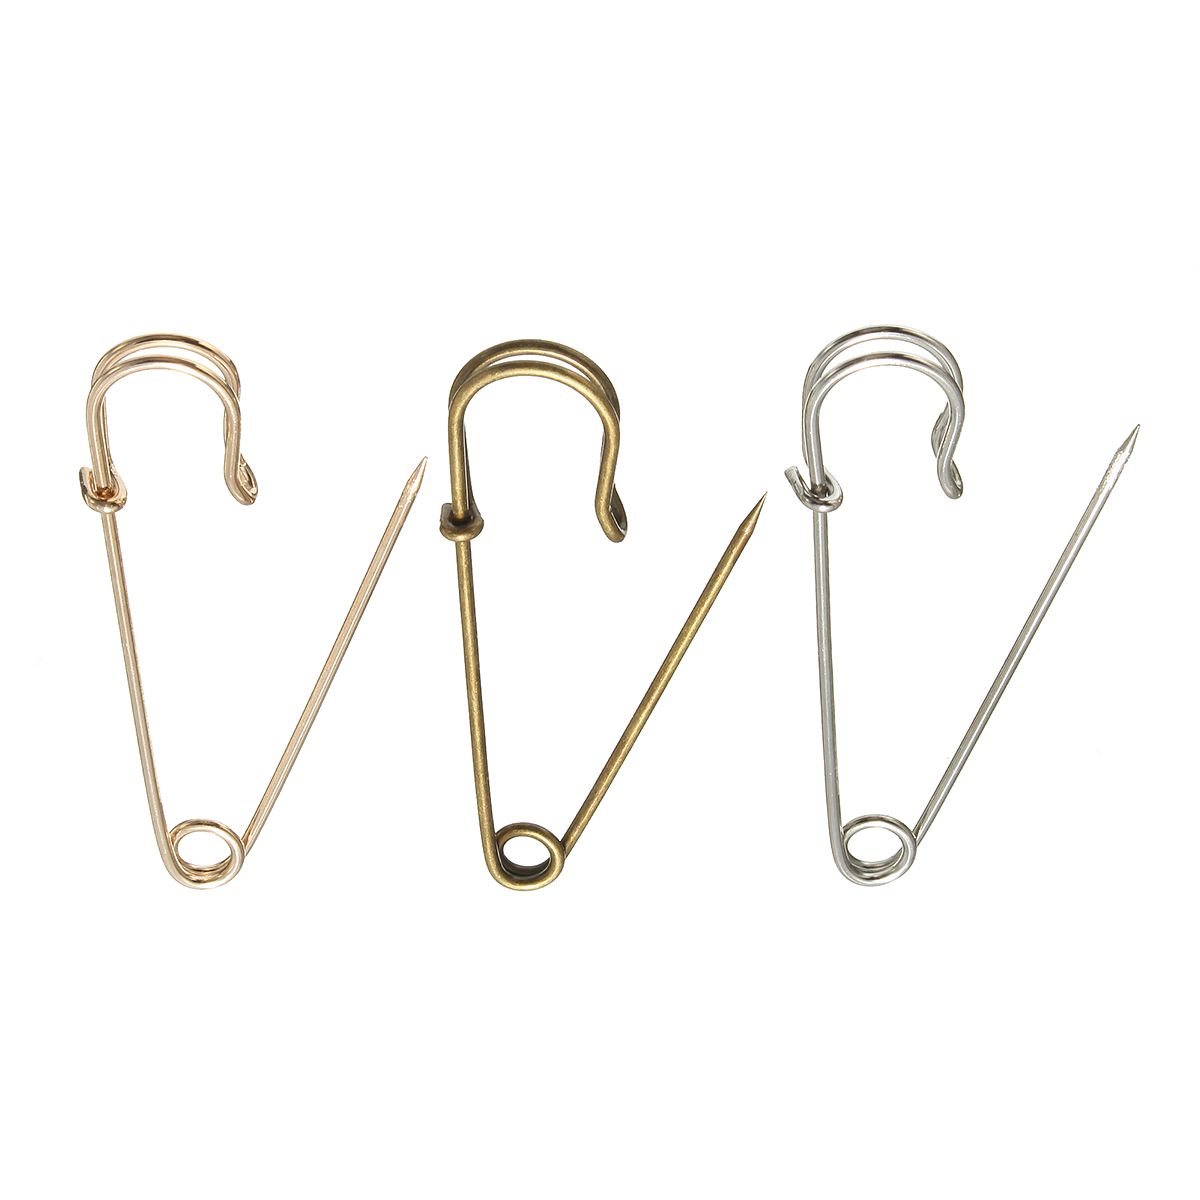 4Pcs-50mm-Safety-Pins-Scarf-Needle-Cloth-for-Sewing-Craft-1123532